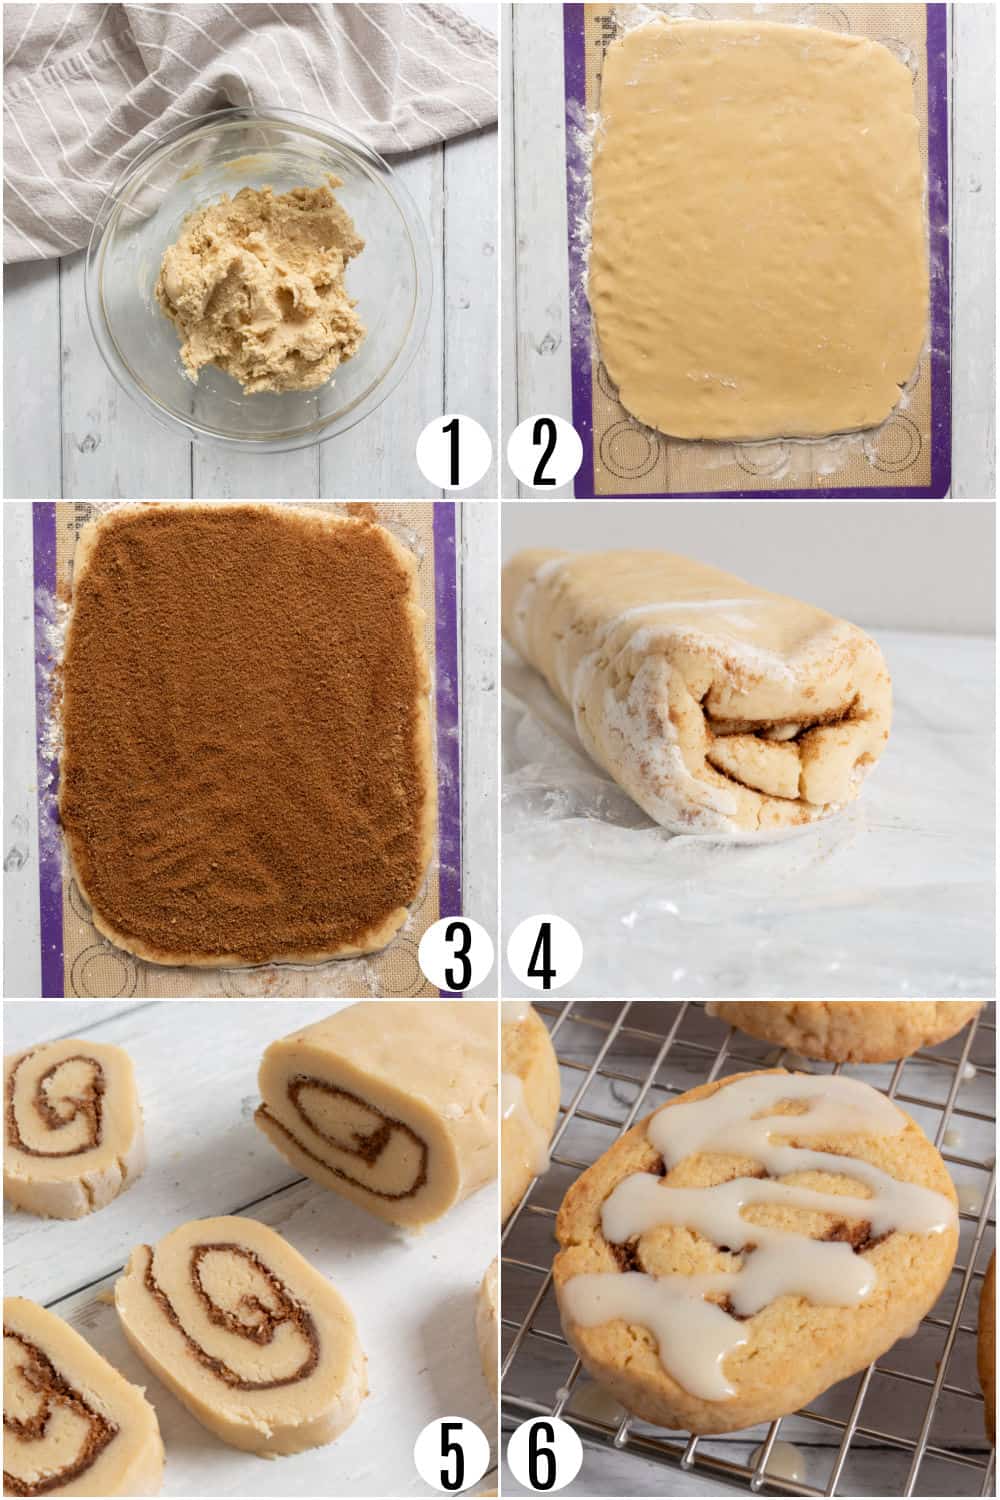 Step by step photos showing how to make cinnamon roll cookies.